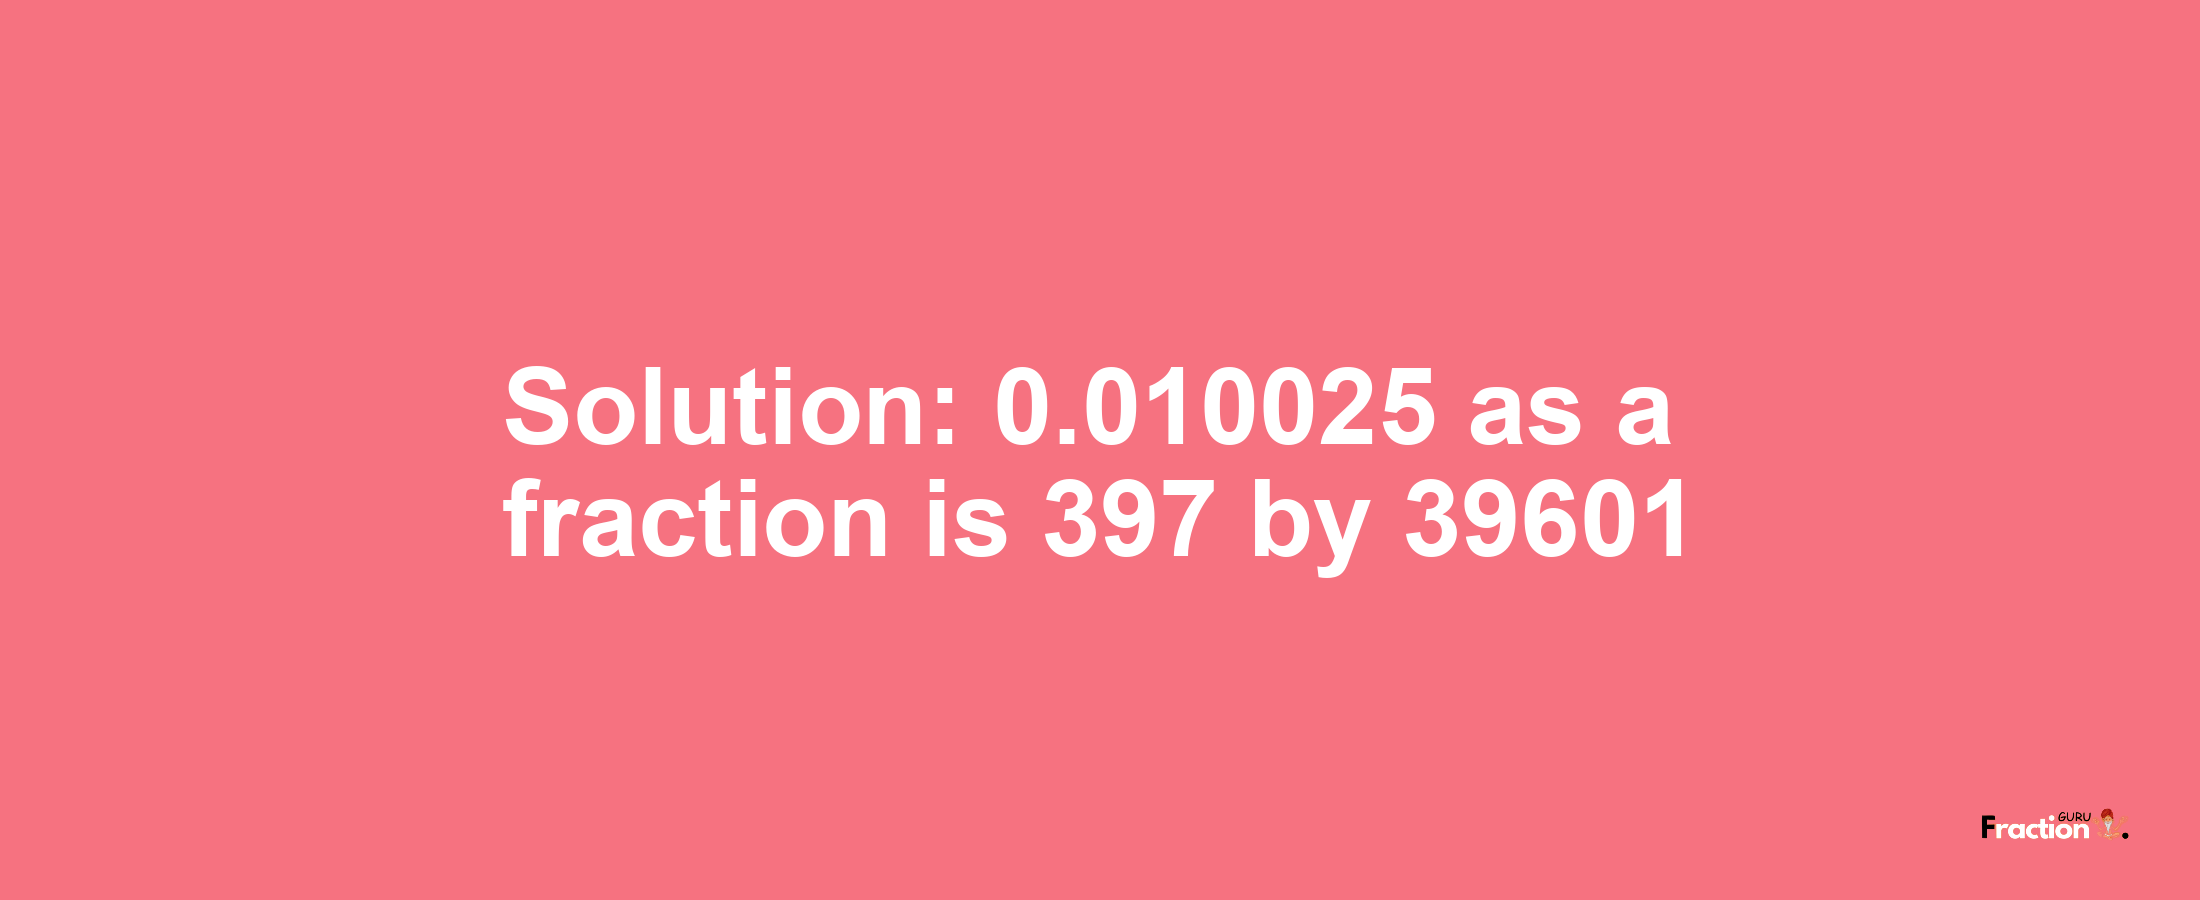 Solution:0.010025 as a fraction is 397/39601